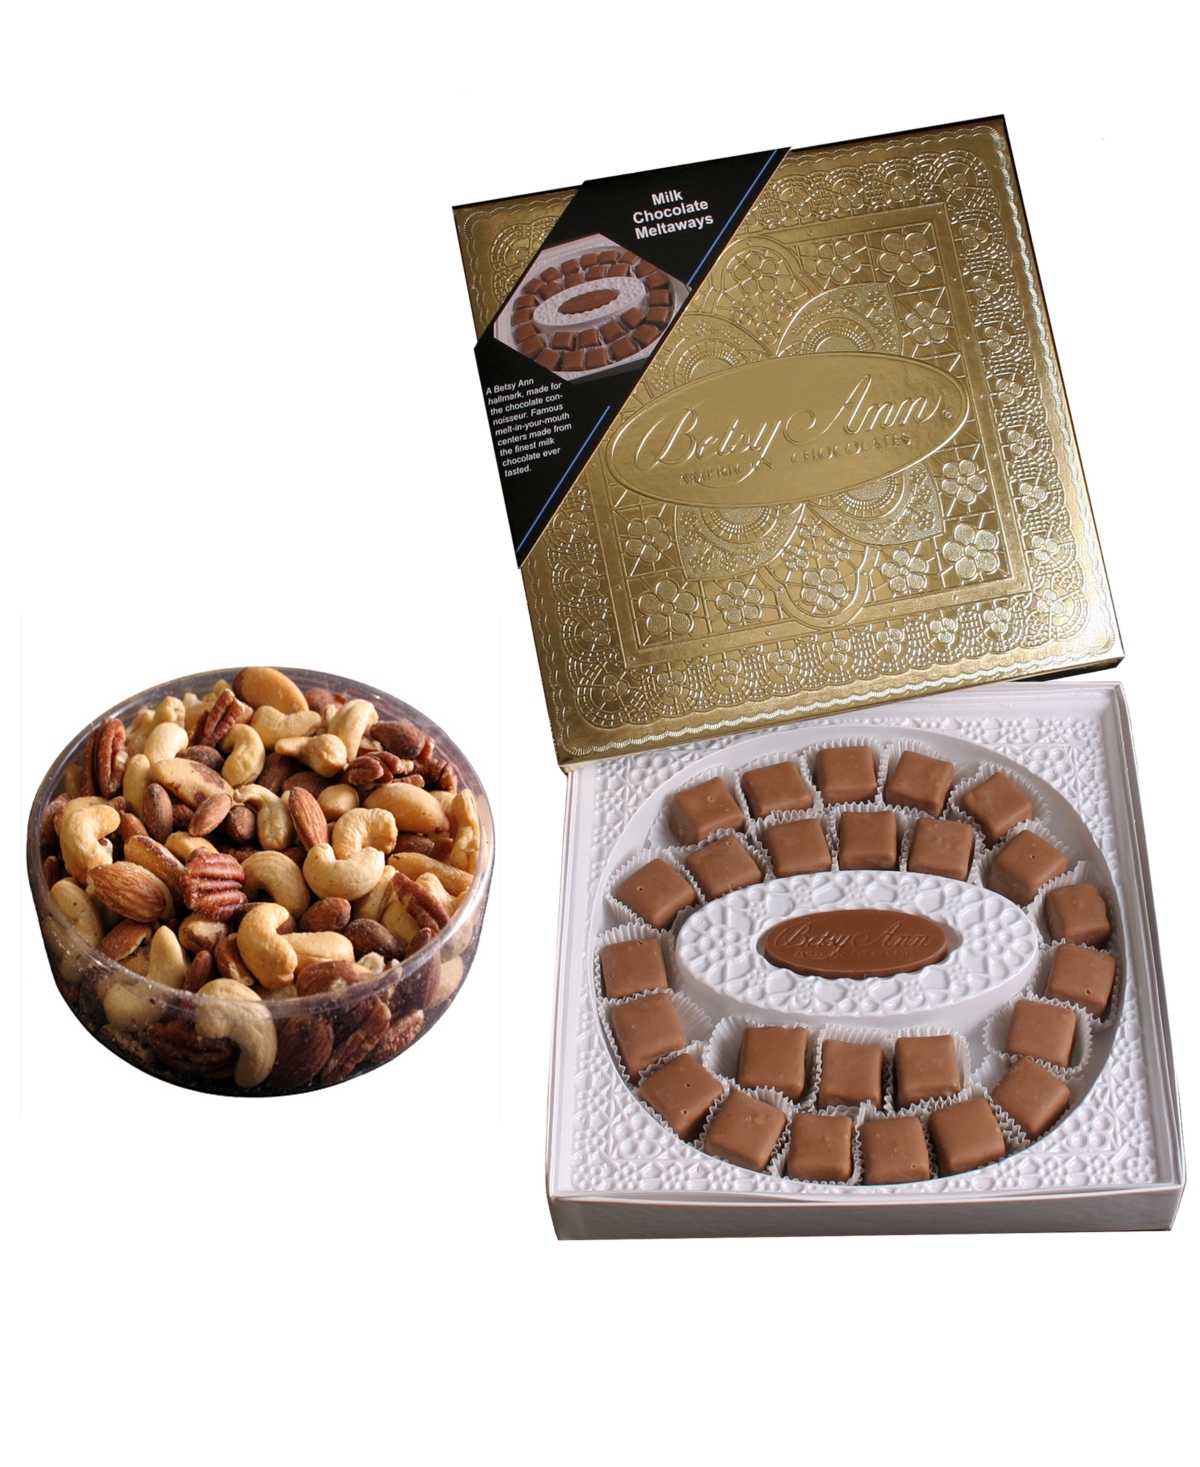 Betsy Ann Chocolates 12oz Fancy Milk Chocolate Meltaways, & 10oz Deluxe Mixed Nuts Gift Bundle, Approximately 112 Pieces